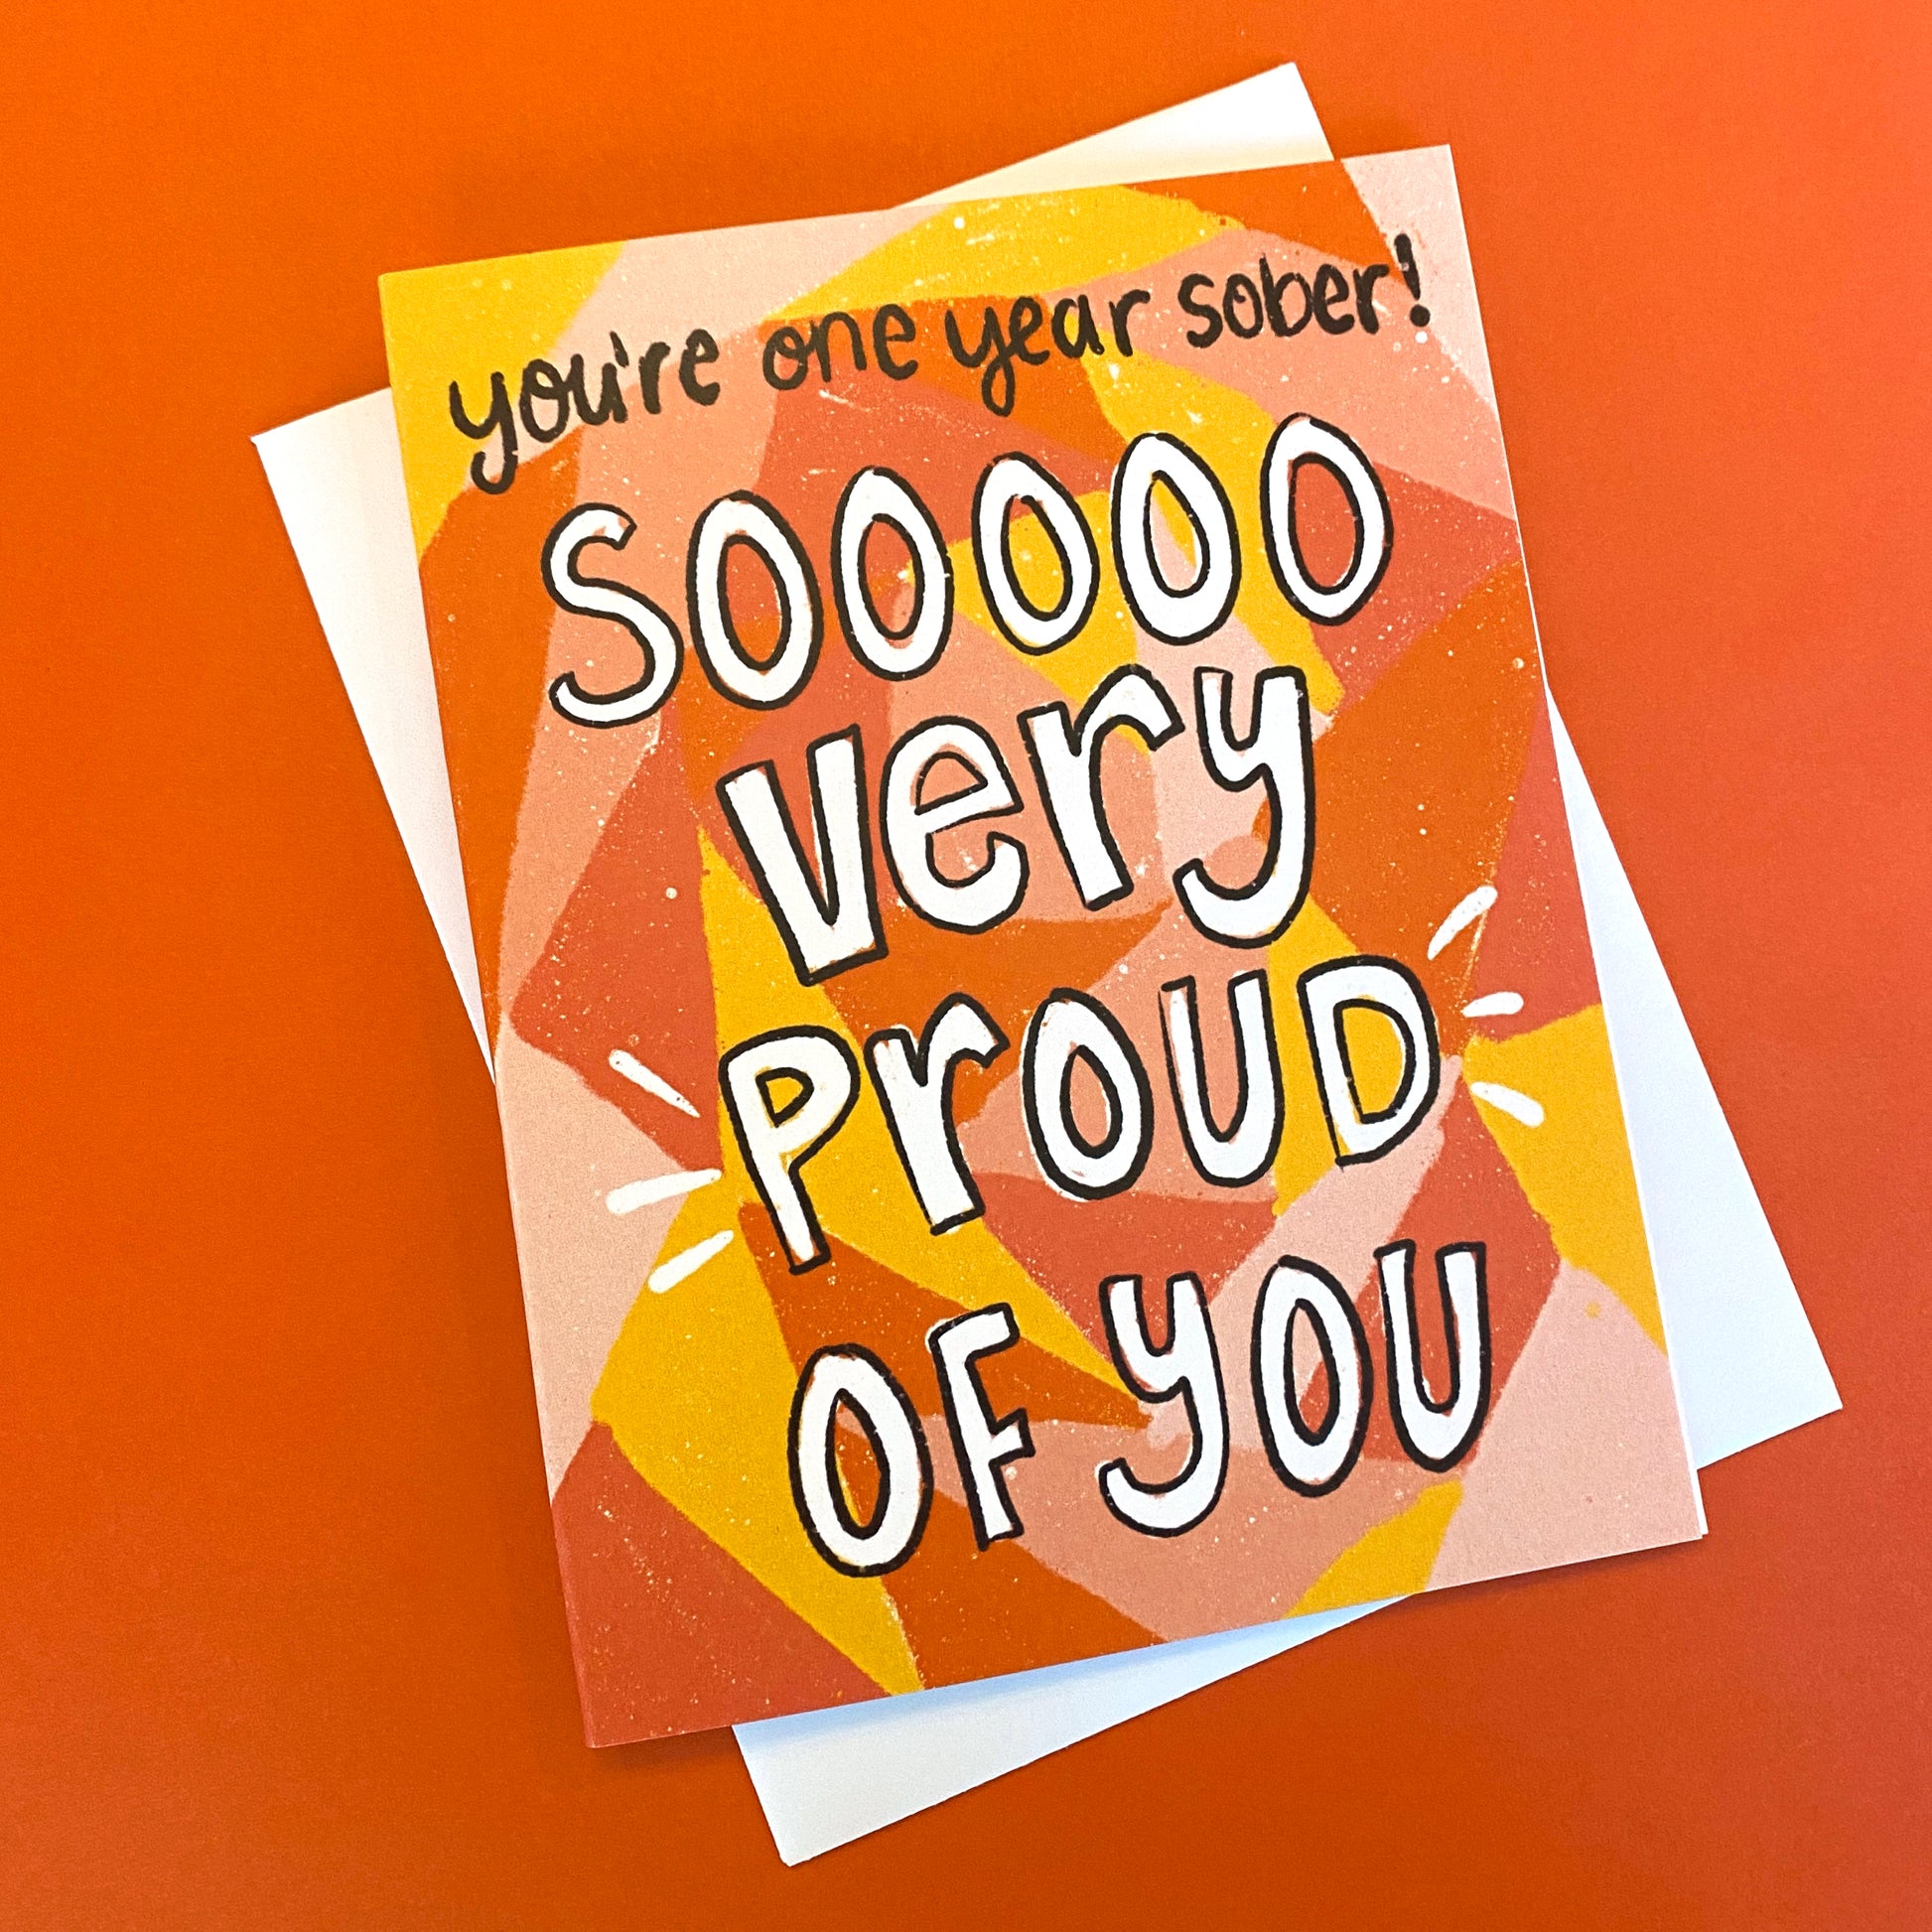 greeting card for someone's one year sober birthday. the cards says "you're one year sober! Soooo very proud of you"